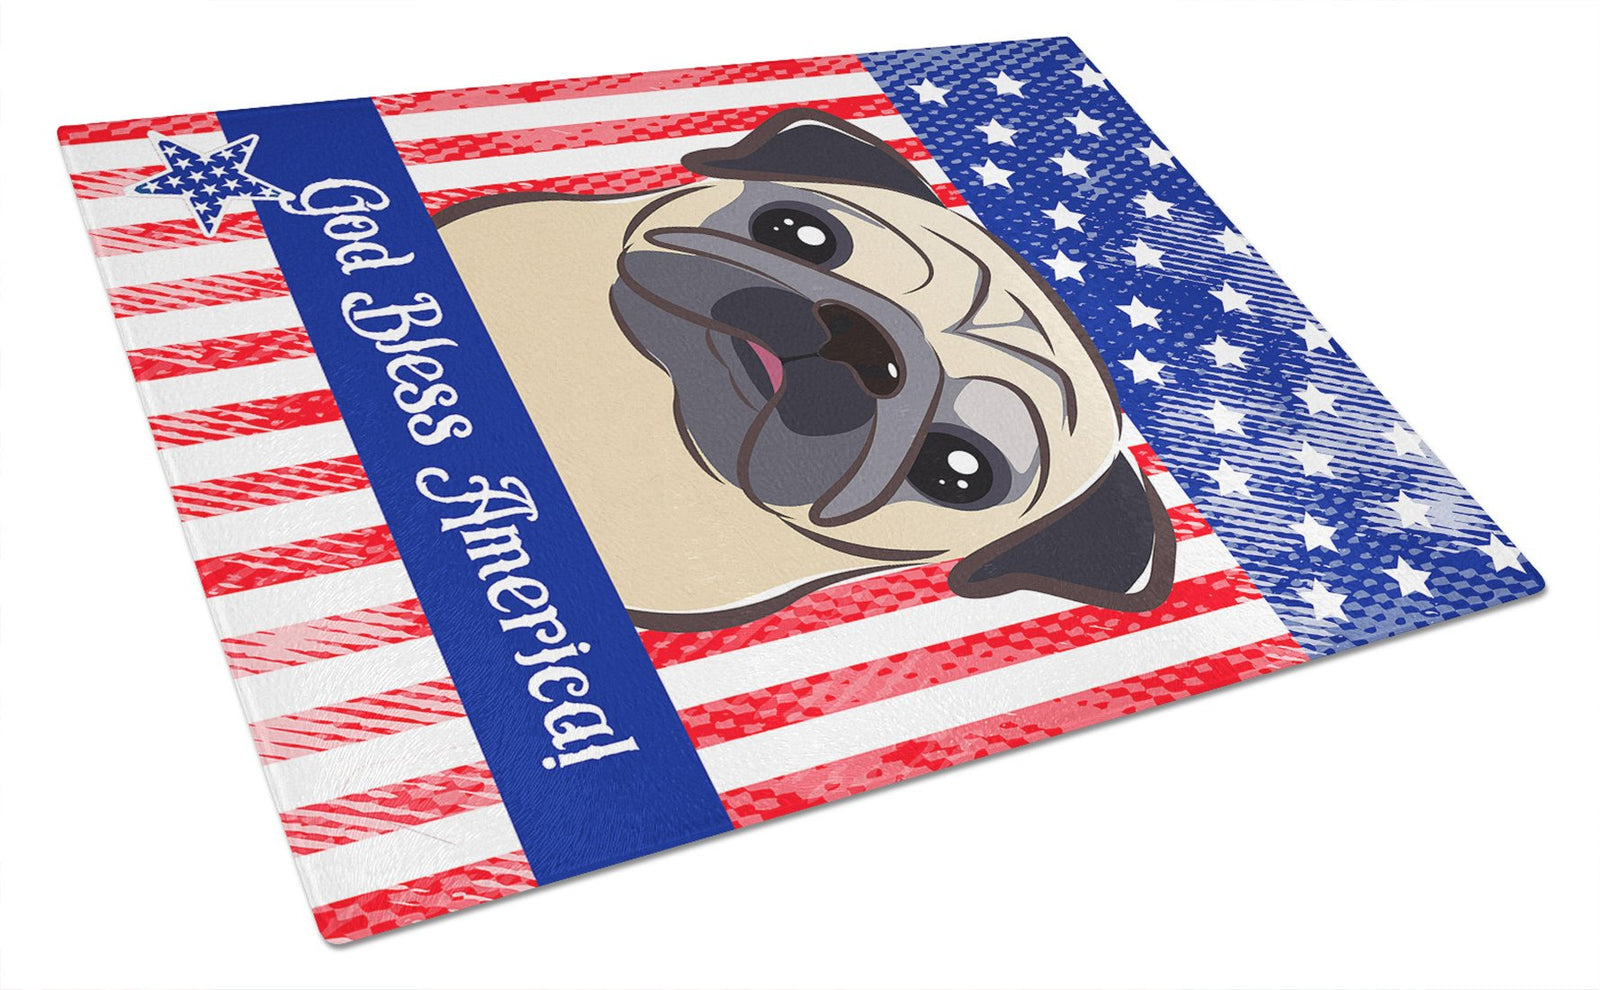 God Bless American Flag with Fawn Pug Glass Cutting Board Large BB2192LCB by Caroline's Treasures